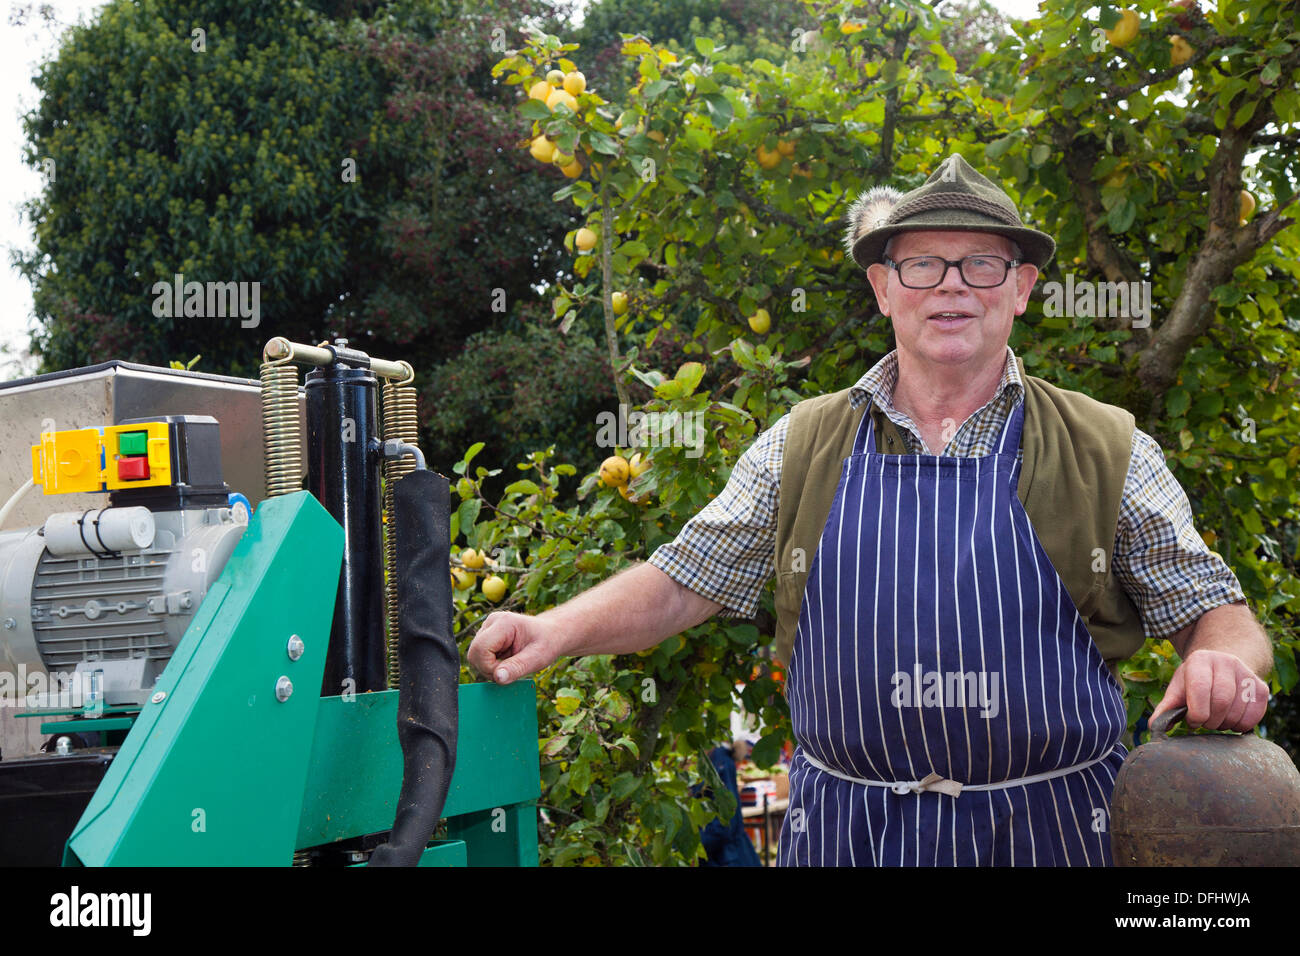 Arnside, Silverdale, UK. 5th October, 2013. Mr Edi Albert pressing apples with a Kerbl Austrian fruit press at Arnside's fifth  AONB Apple Day at Briery Bank Orchard, Arnside. Lots of apples and pumpkins on sale,  wildlife displays, apple identification experts puzzling over rare varieties and lots of freshly pressed juice - the apple press worked hard all day to satisfy the thirst of almost 1000 visitors. Stock Photo